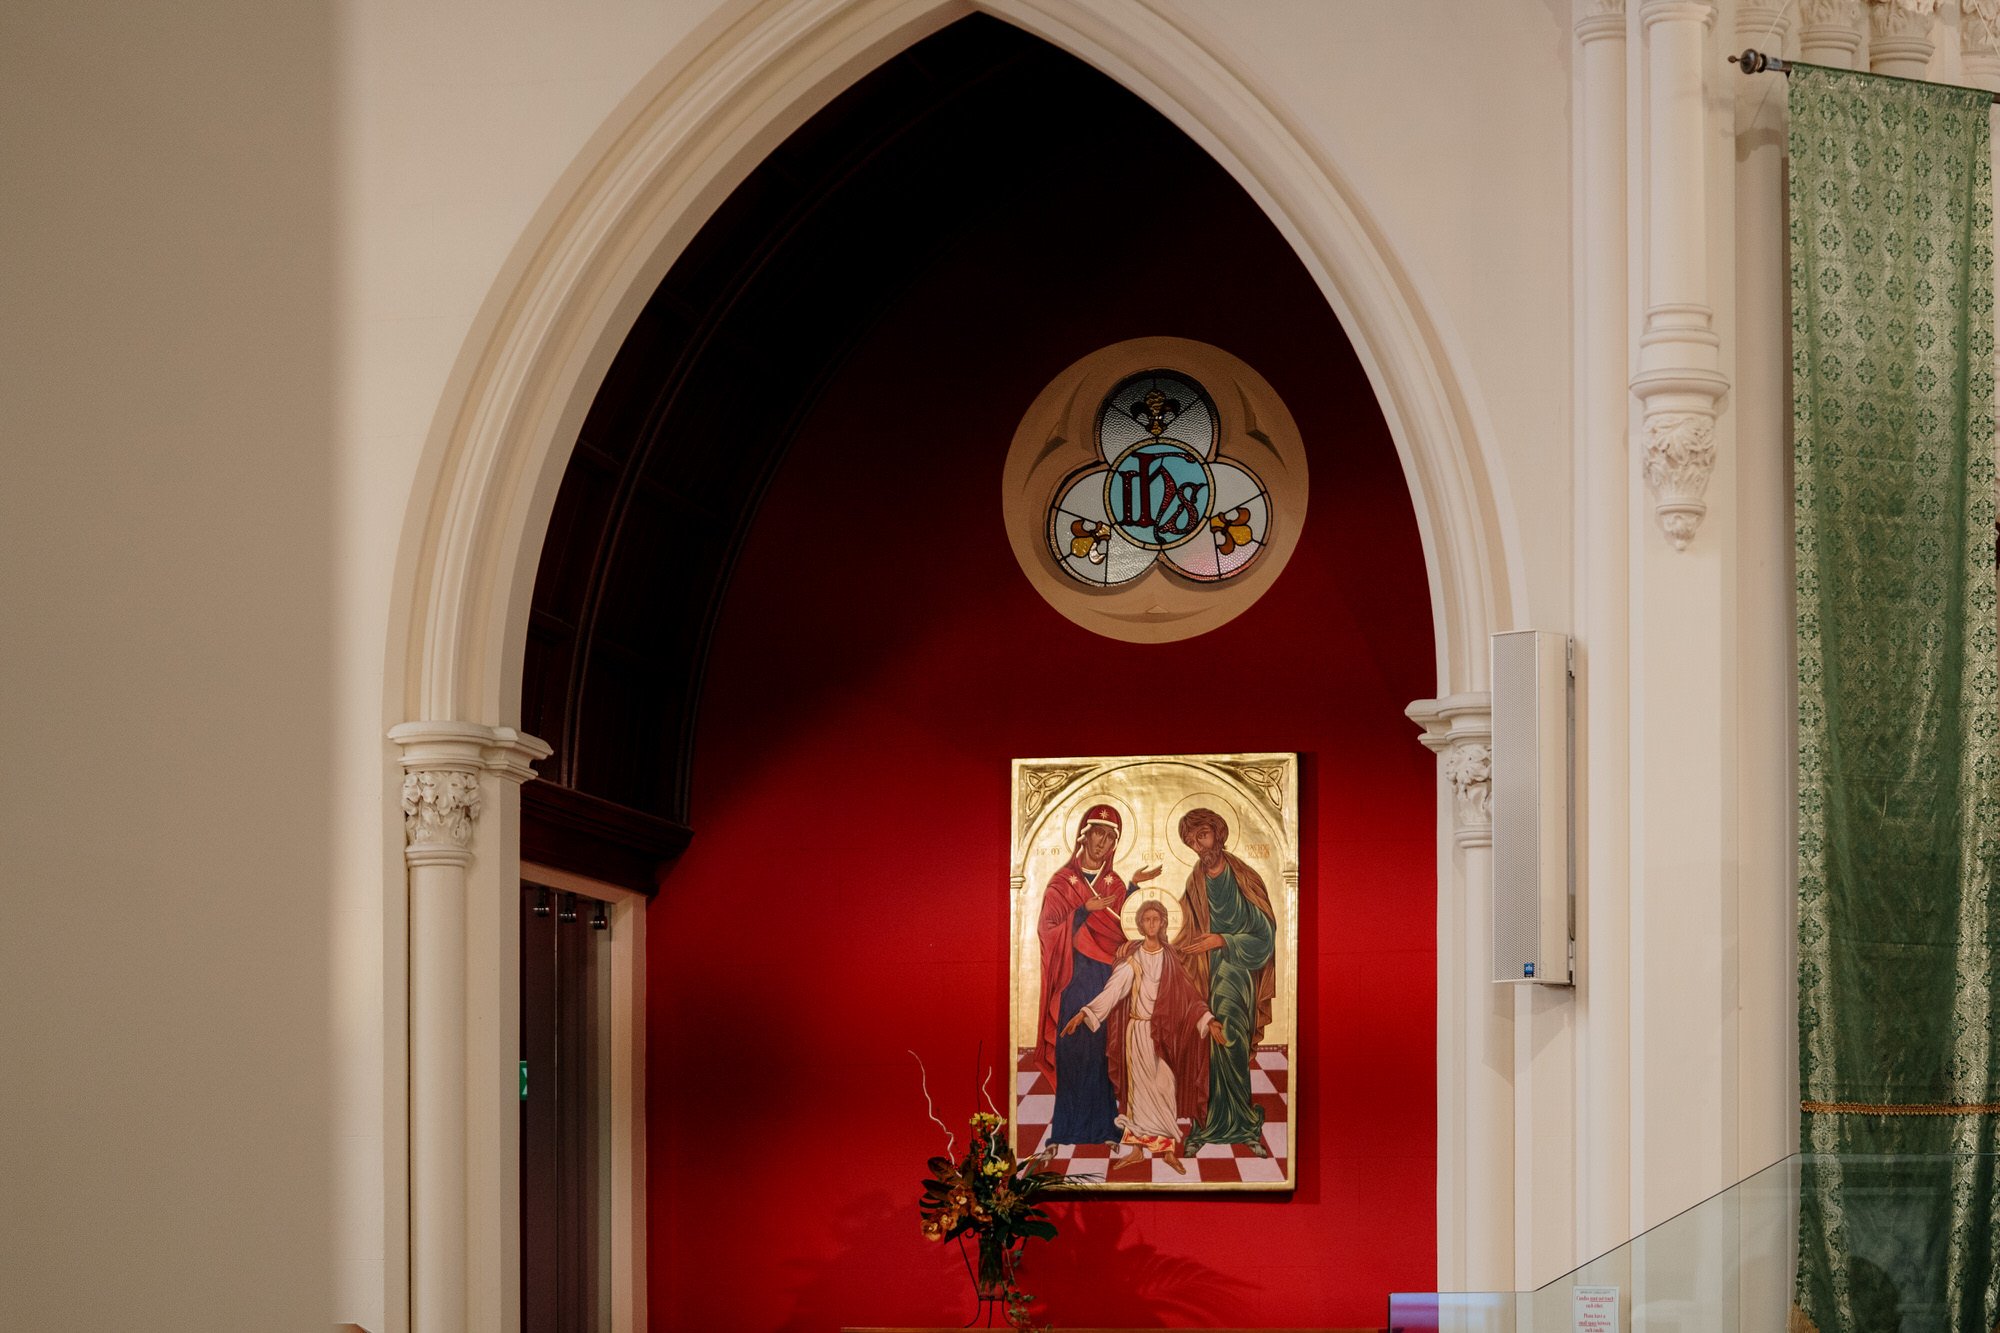 mantells-mt-eden-st-patricks-cathedral-alberton-house-top-auckland-wedding-phtographer-2023-photography-videography-film-new-zealand-NZ-best-urban-venue-catholic-ceremony-dear-white-productions (158).jpg